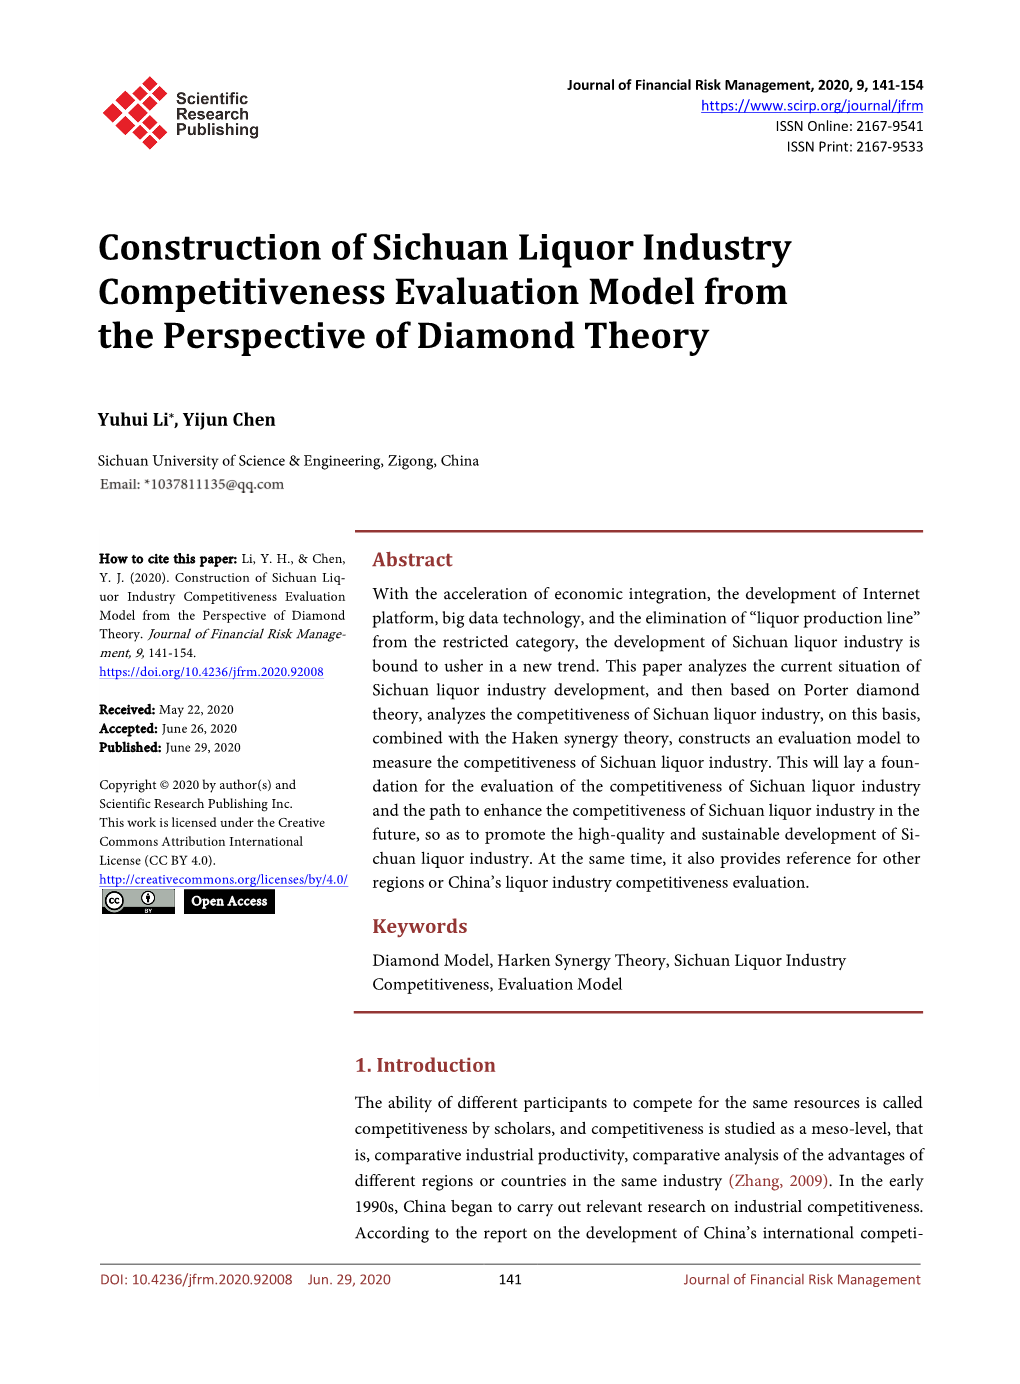 Construction of Sichuan Liquor Industry Competitiveness Evaluation Model from the Perspective of Diamond Theory